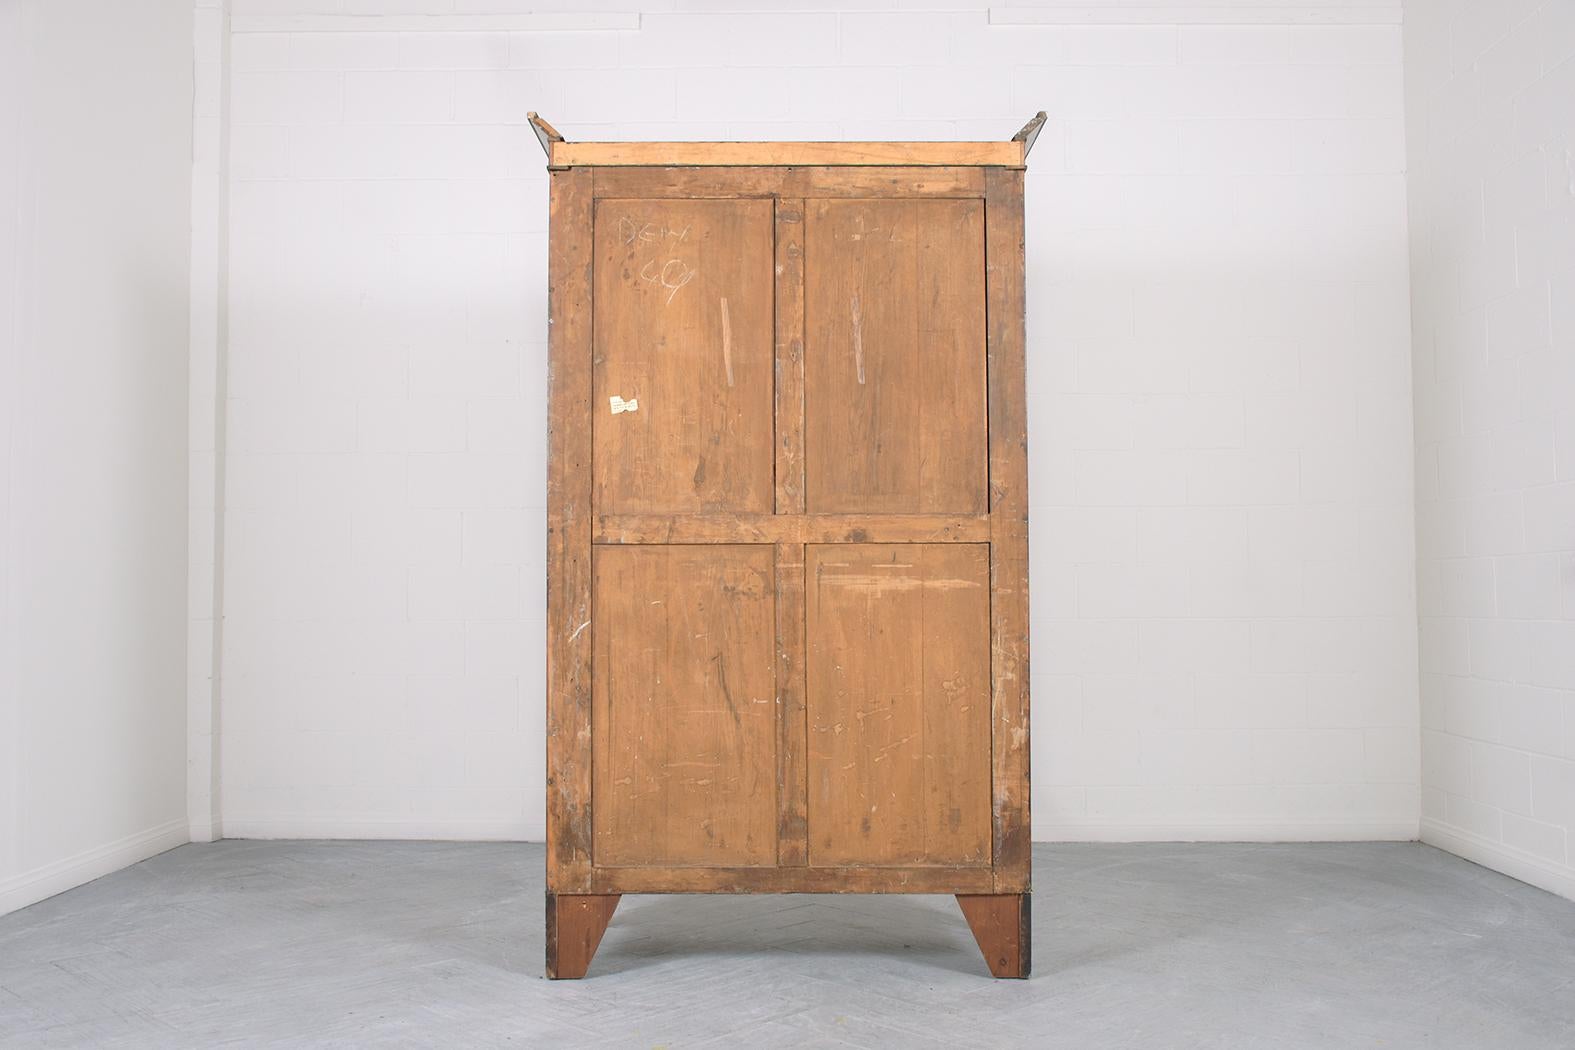 19th-Century American Classical Mahogany Tall Chest of Drawers For Sale 2